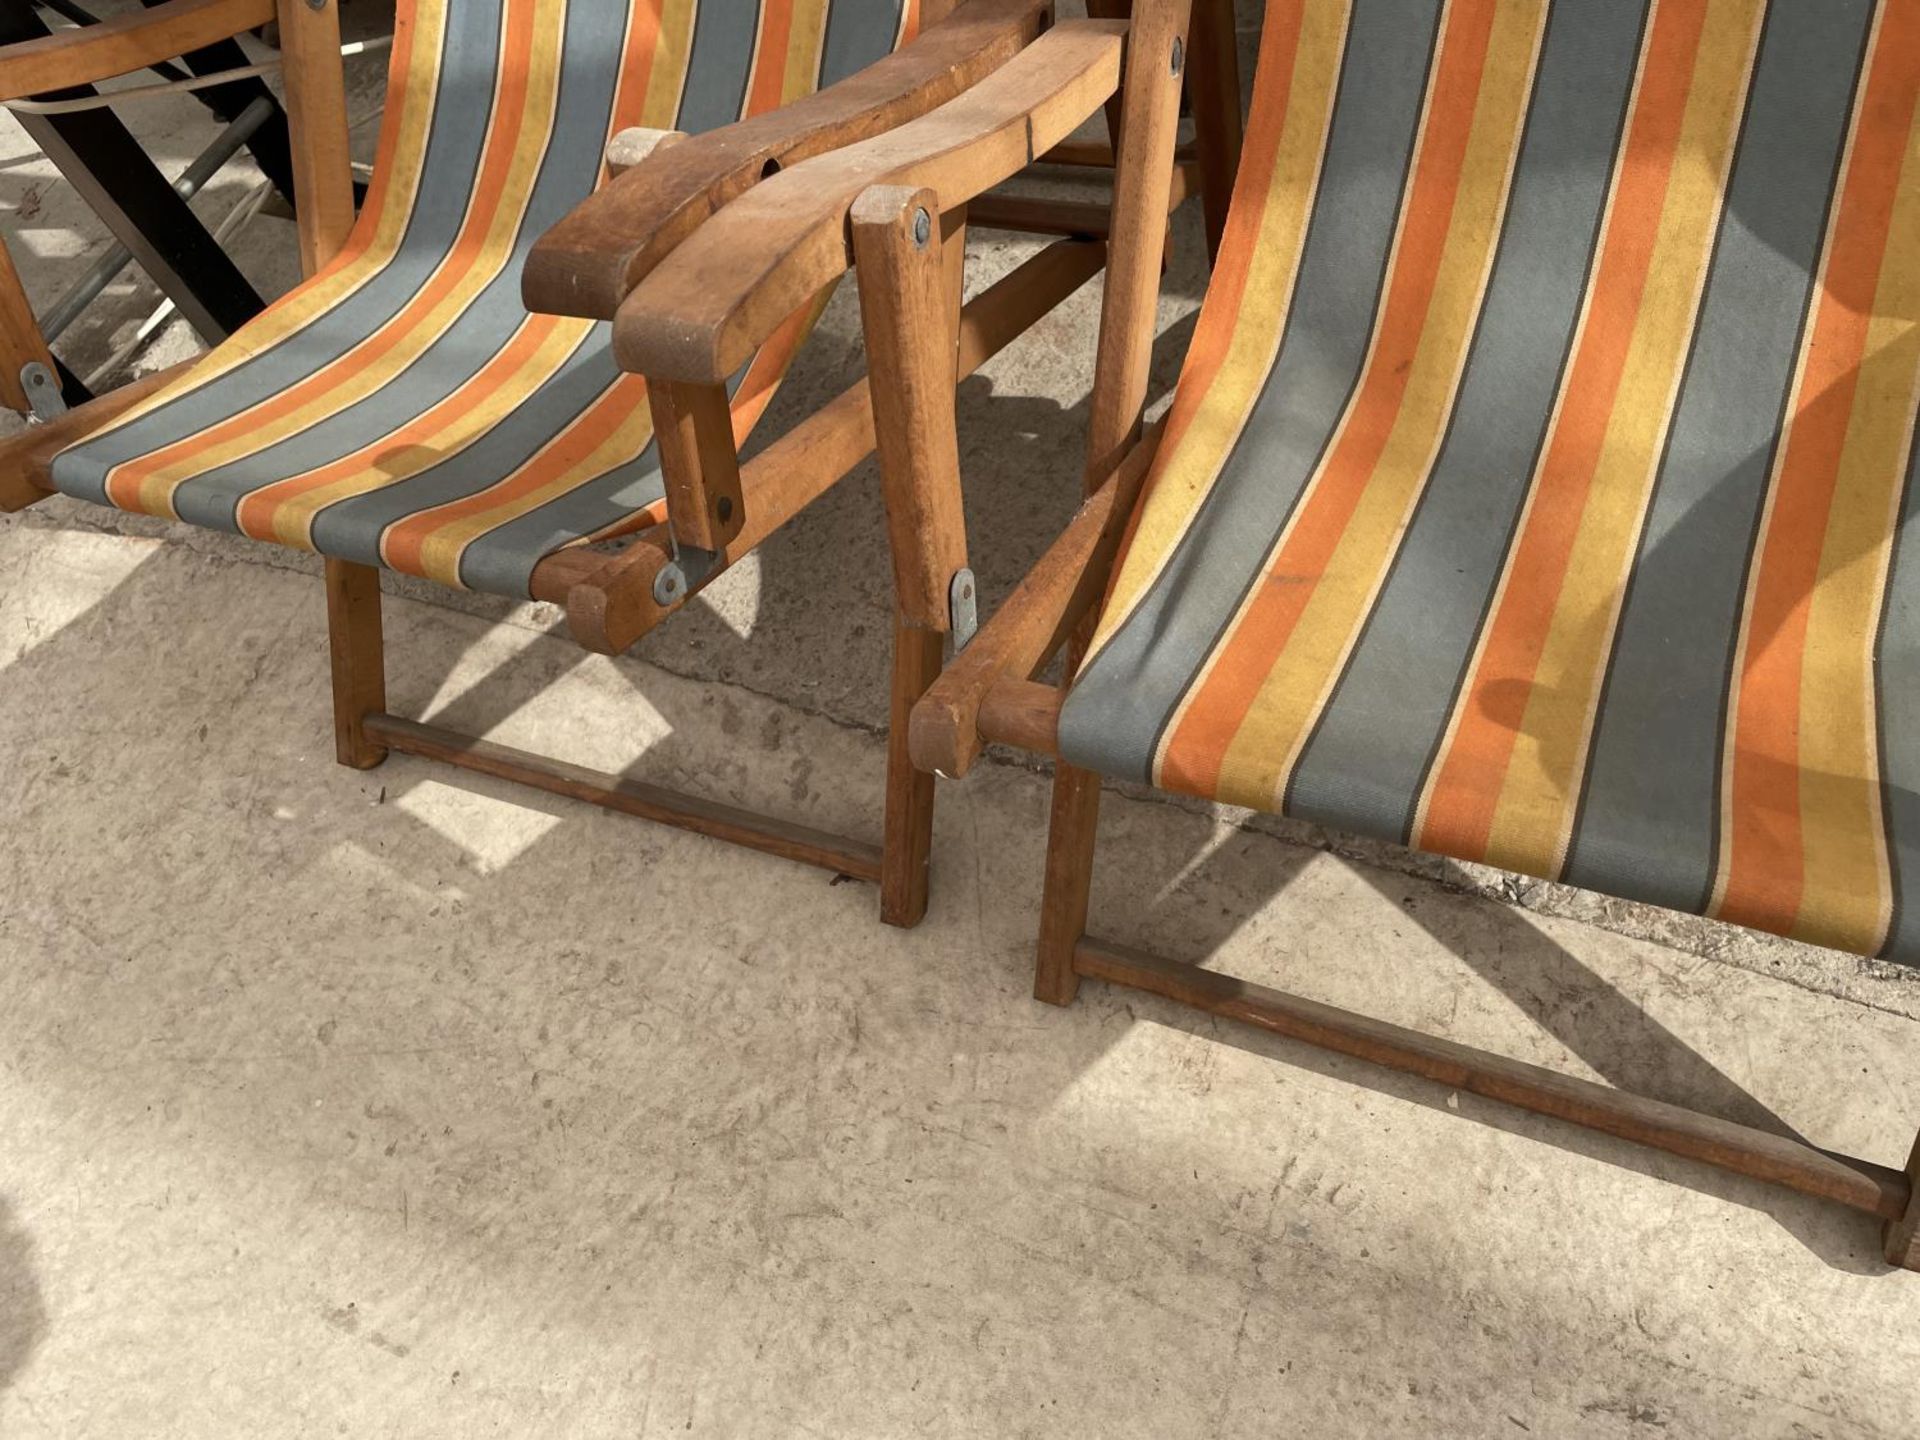 A PAIR OF WOODEN FRAMED FOLDING DECK CHAIRS - Image 3 of 4